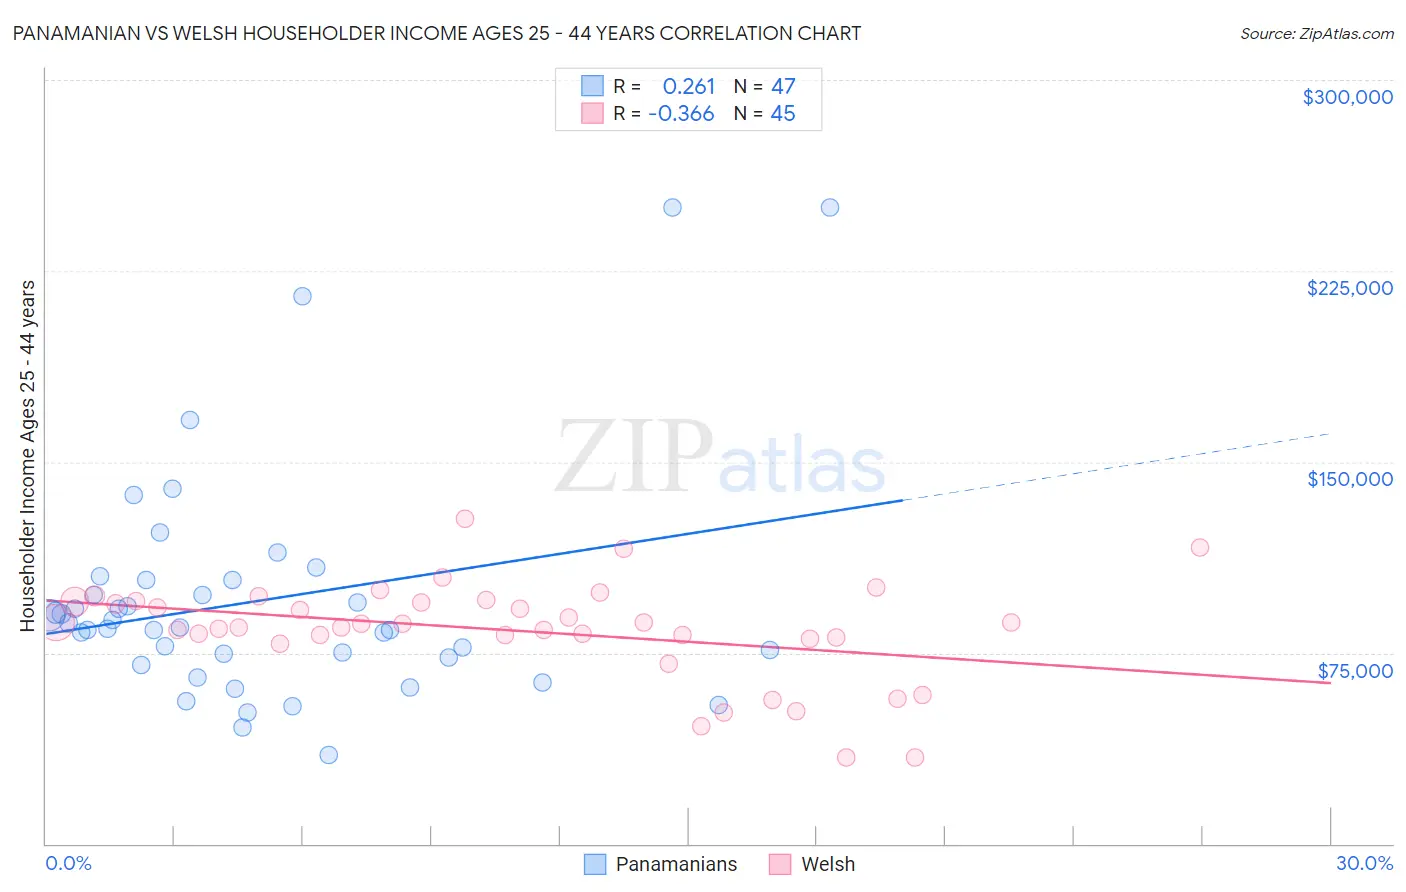 Panamanian vs Welsh Householder Income Ages 25 - 44 years